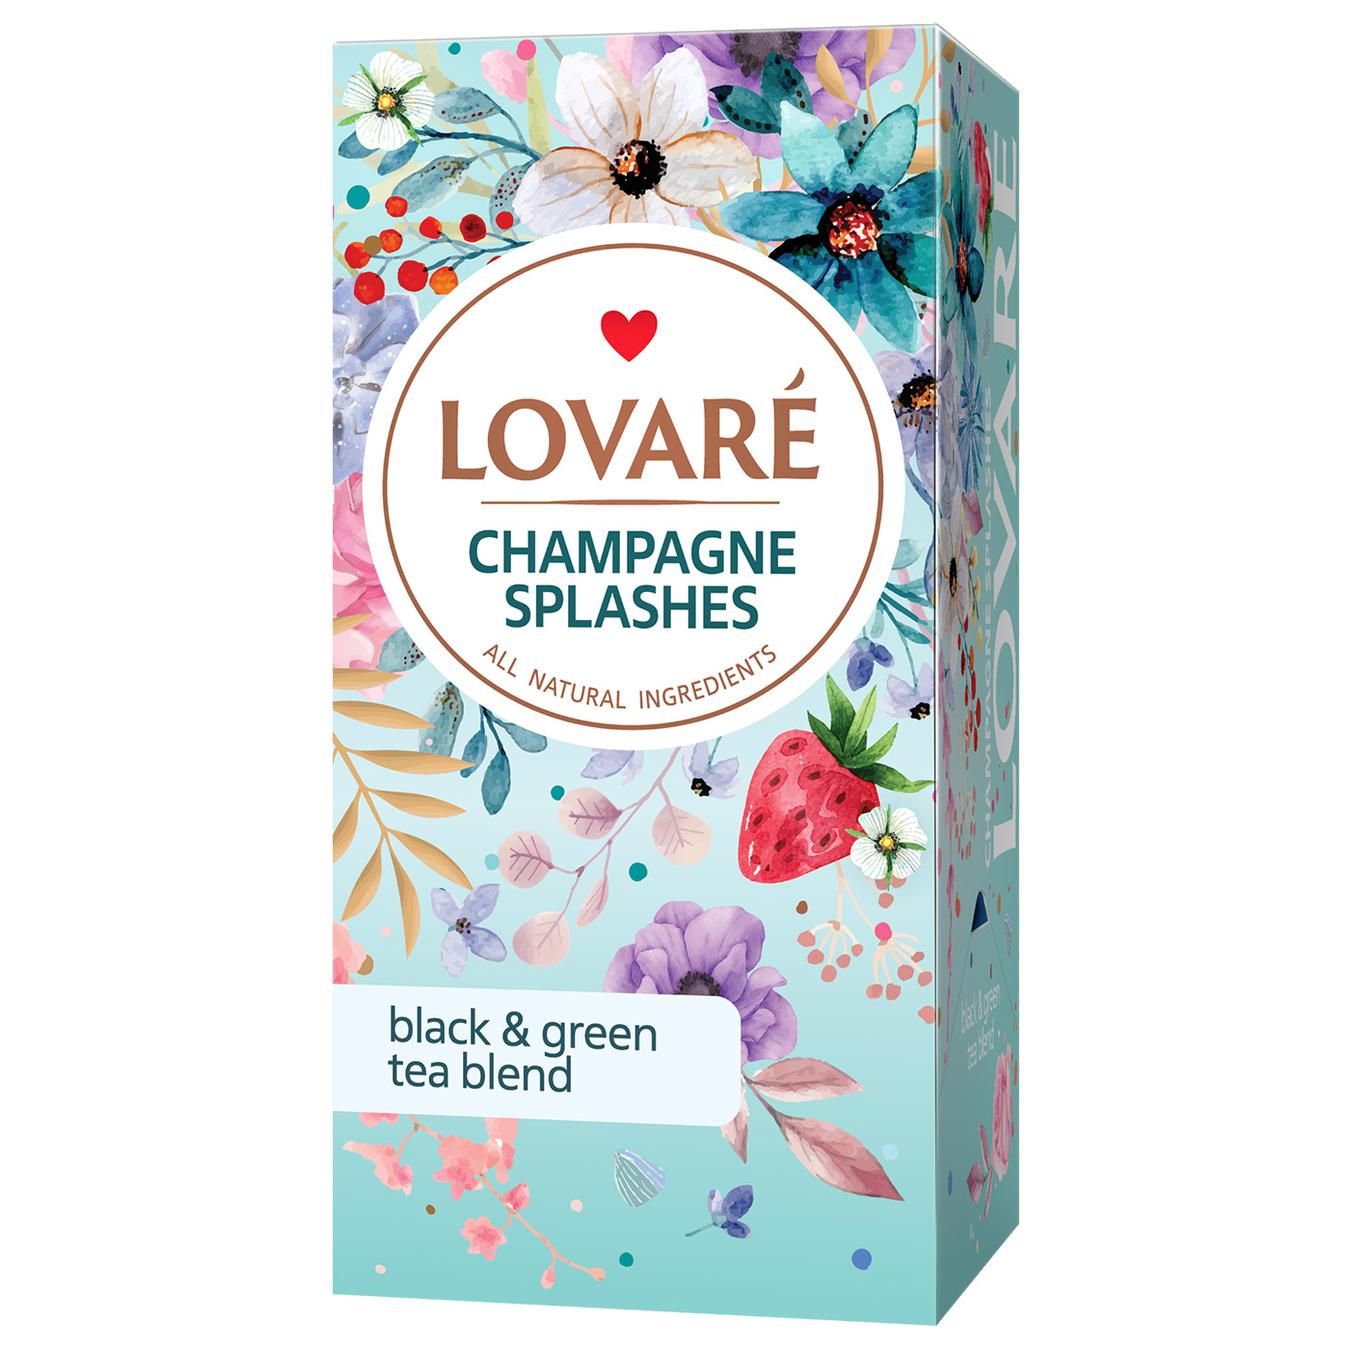 Lovare Champagne Splashes Black and Green Leaf Tea with Berries and Fruits 24pcs * 2g